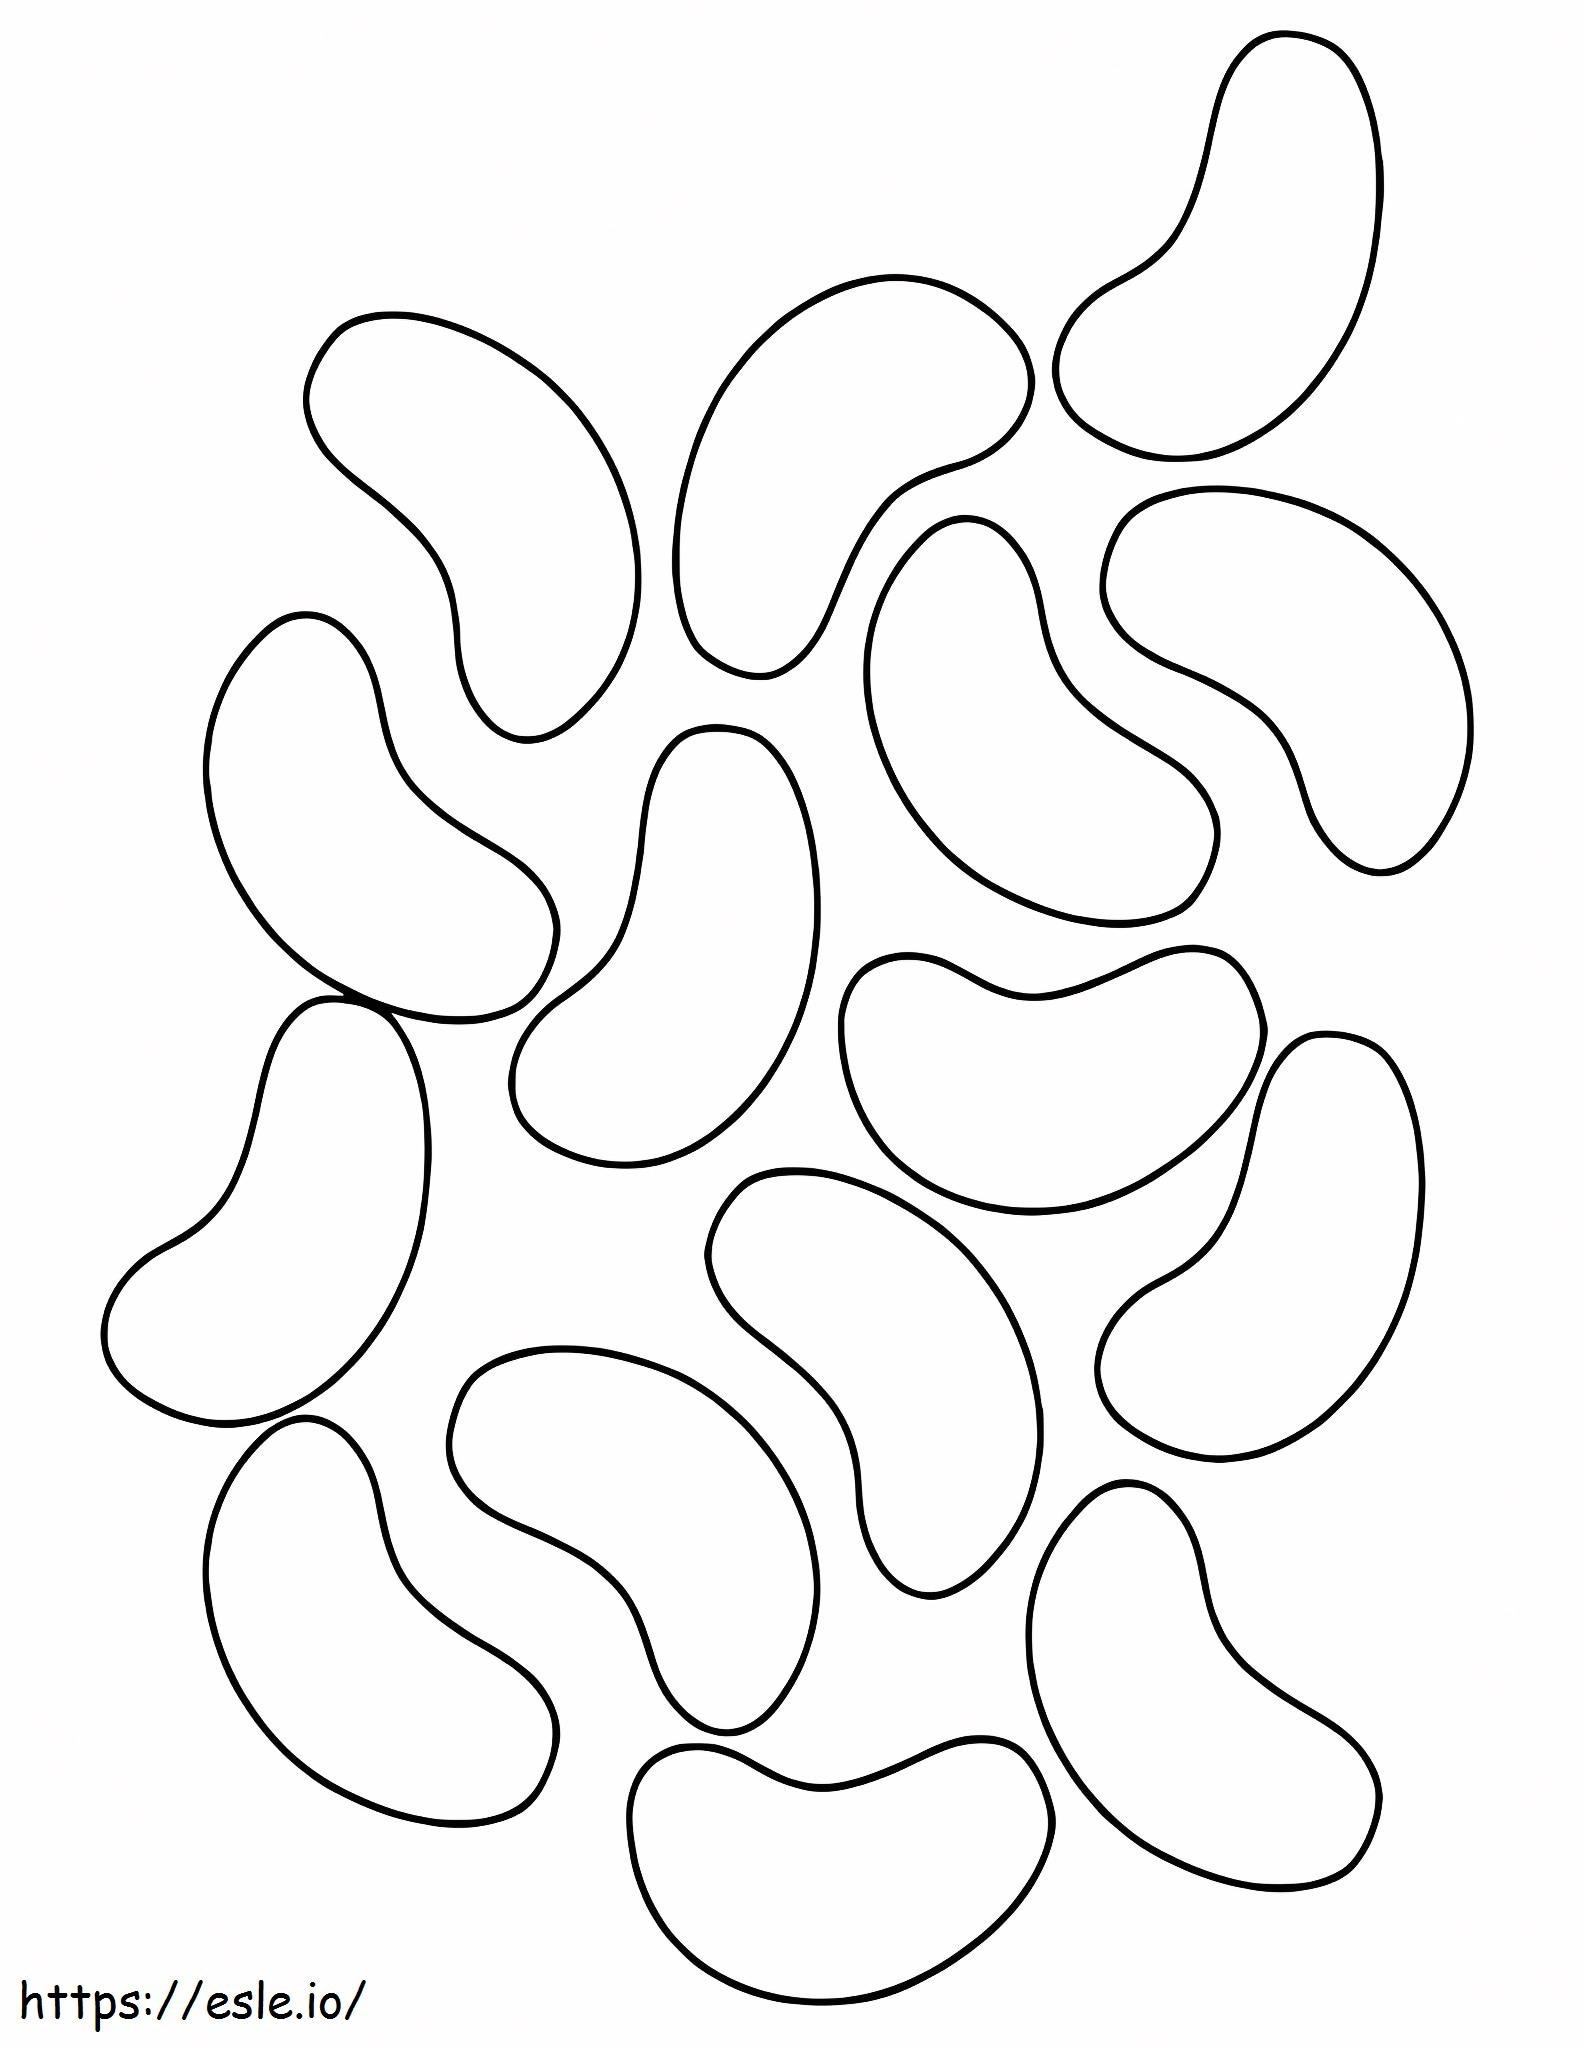 Perfect Bean coloring page